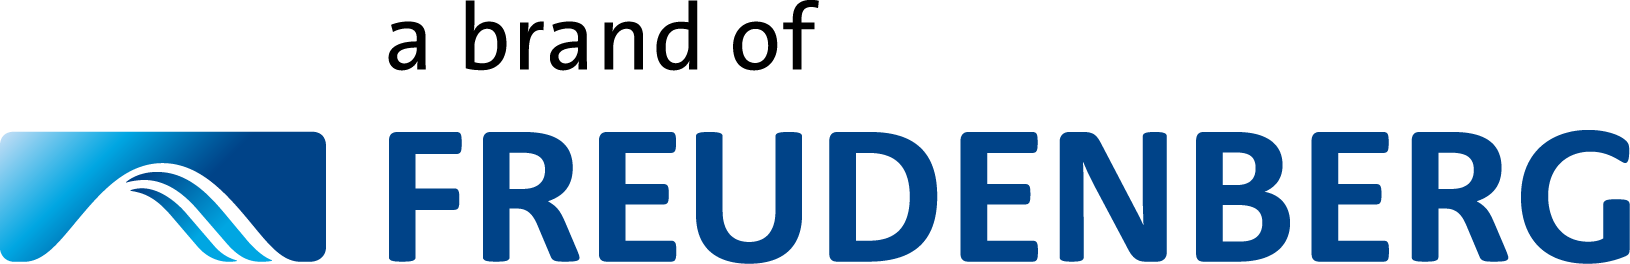 Logo which shows "a brand of Freudenberg"